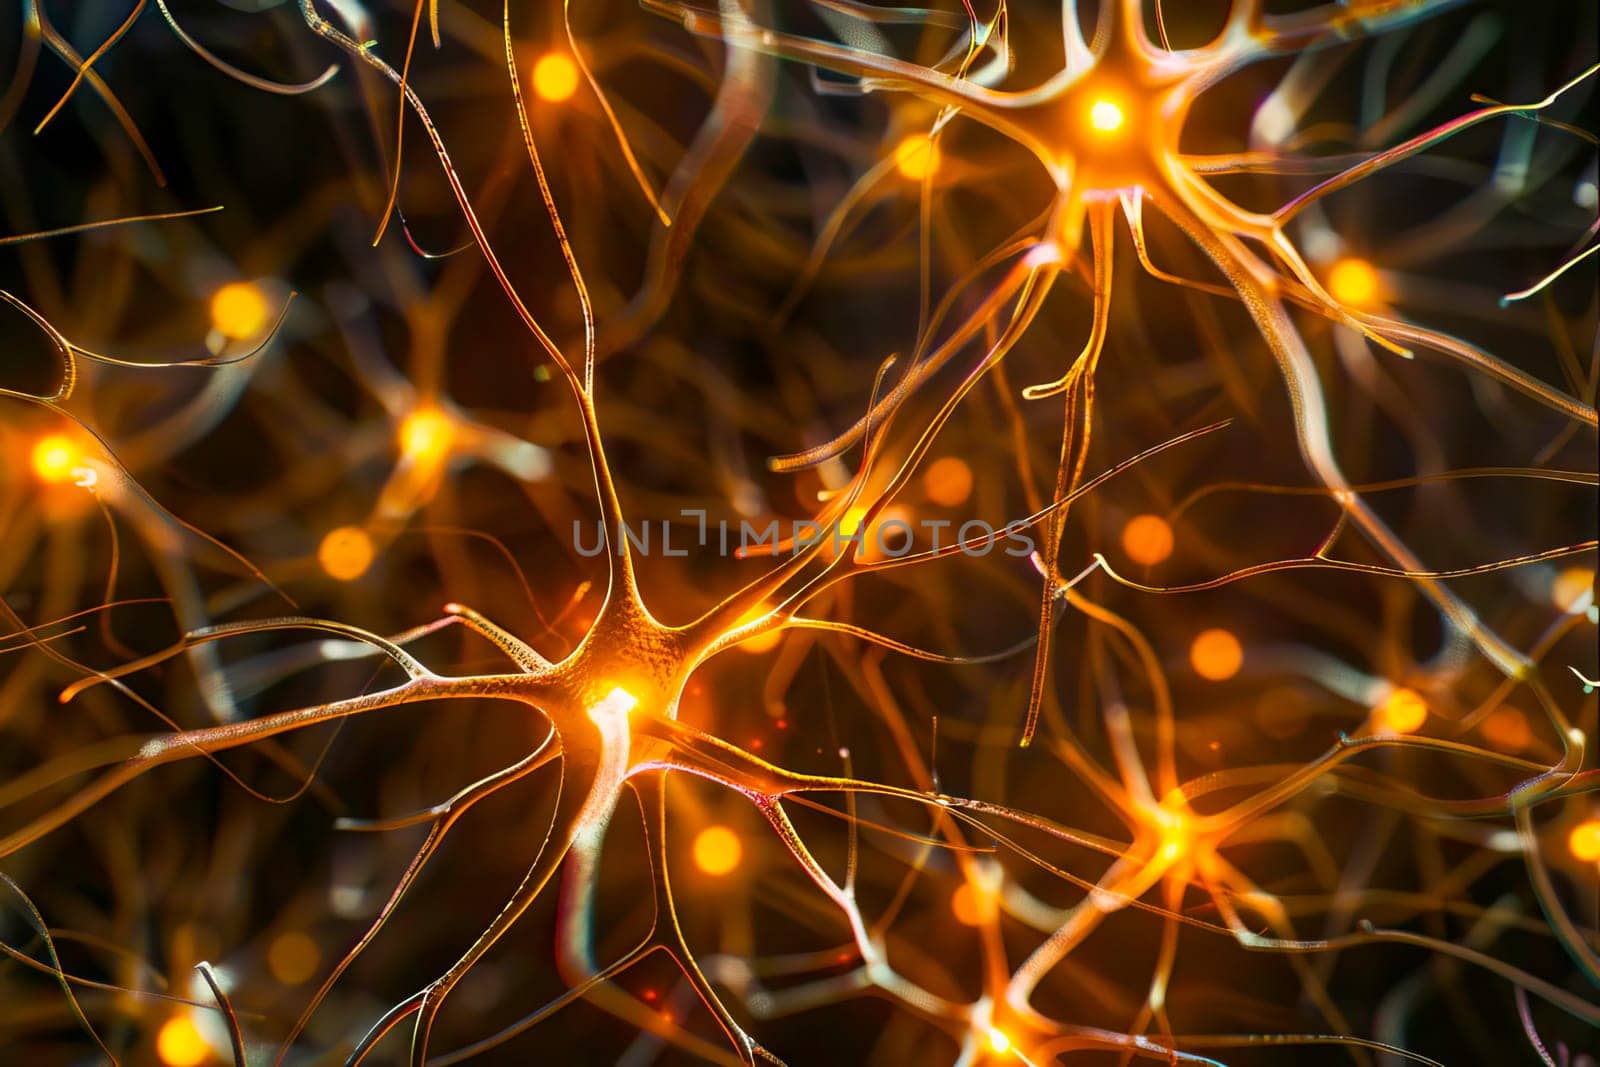 Neurons interconnected with bright signals representing brain activity by vladimka